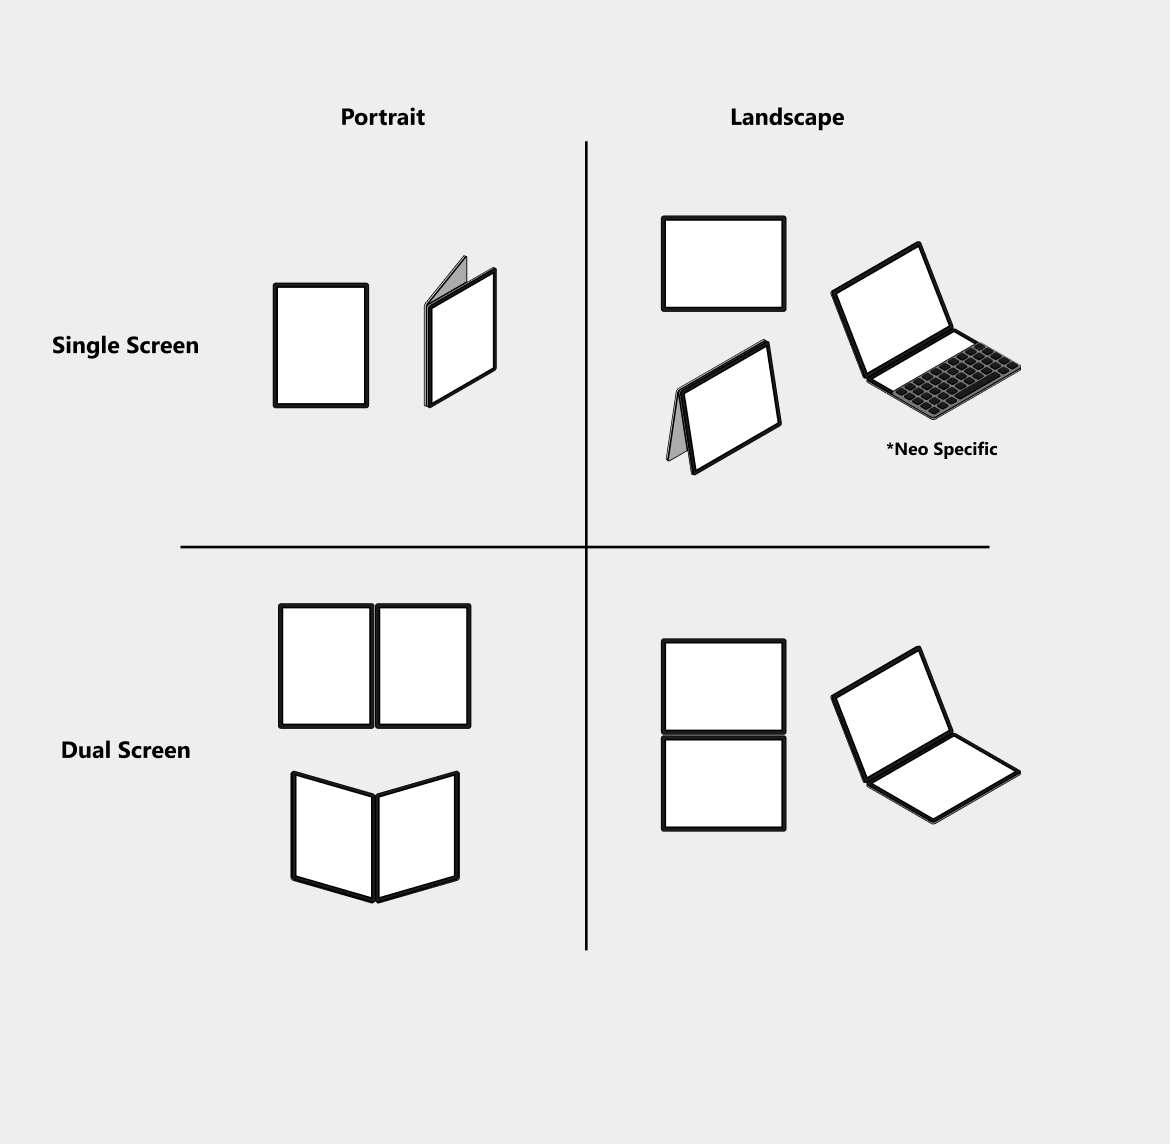 Matrix of postures and orientations for dual-screen and foldable devices